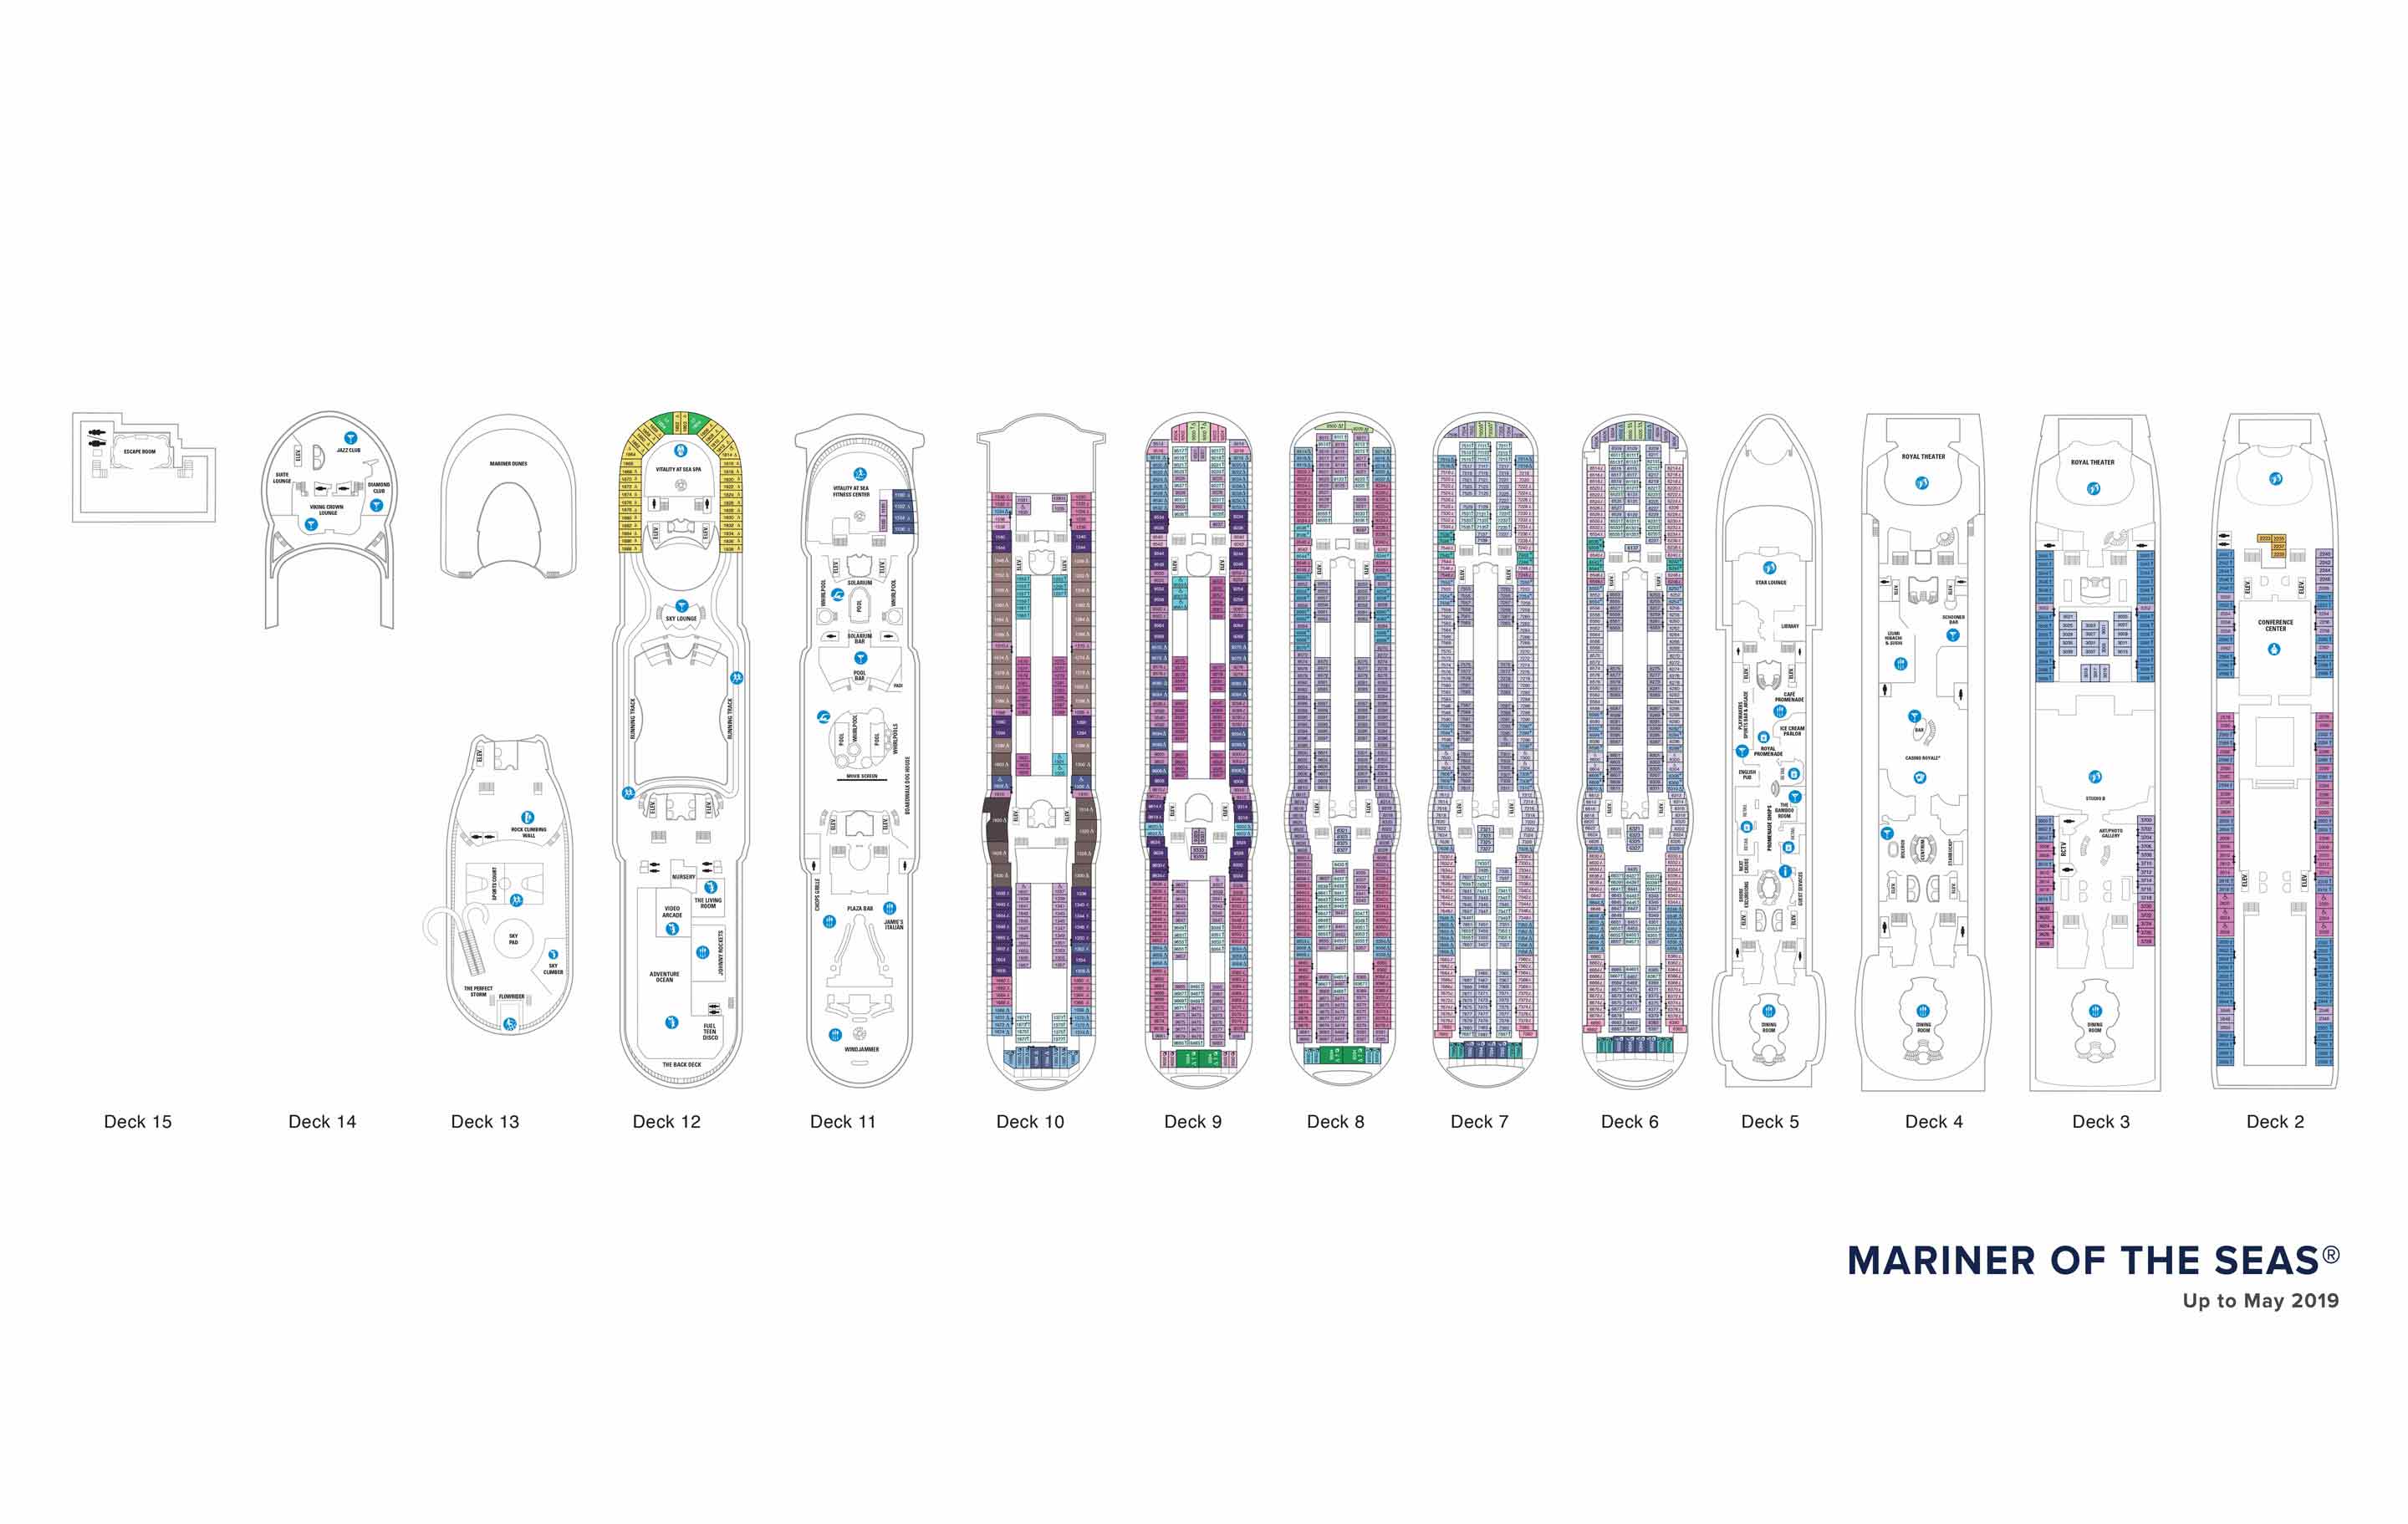 The deck plans for Mariner of the Seas, Royal Caribbean Cruises